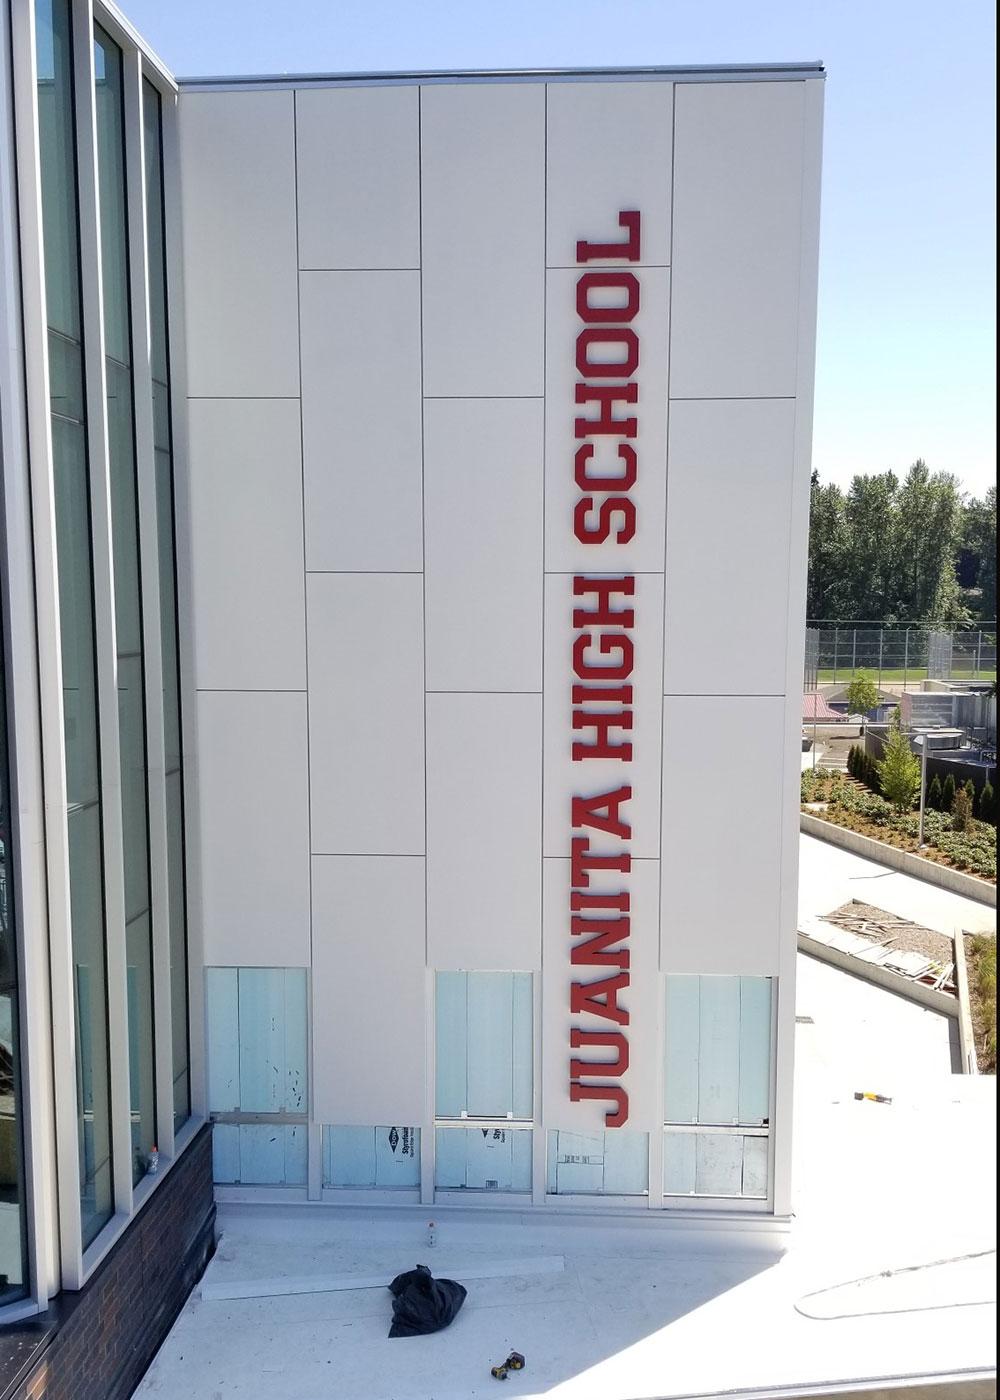 Exterior dimensional signage for Juanita High School was fabricated for this impressive entry and facade.